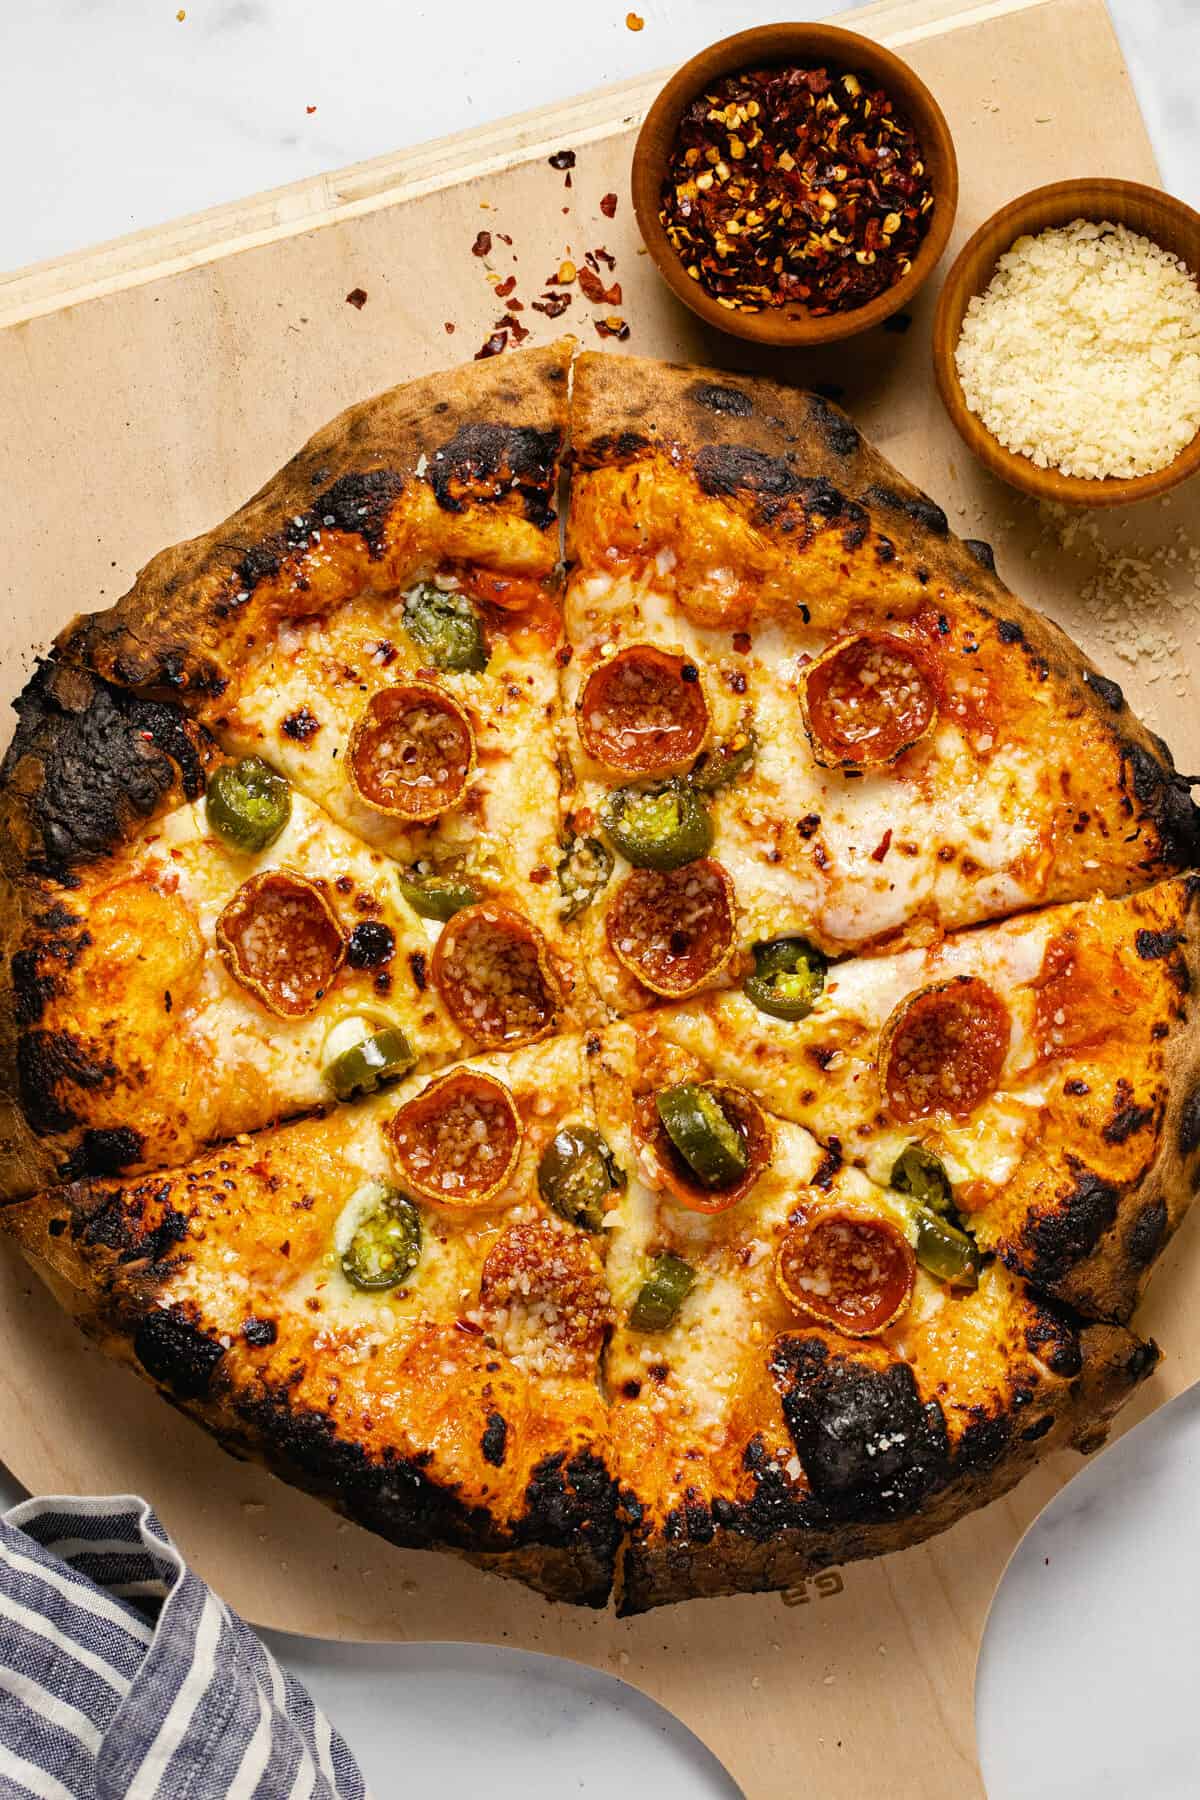 Overhead shot of a pepperoni jalapeno pizza on a wooden pizza peel